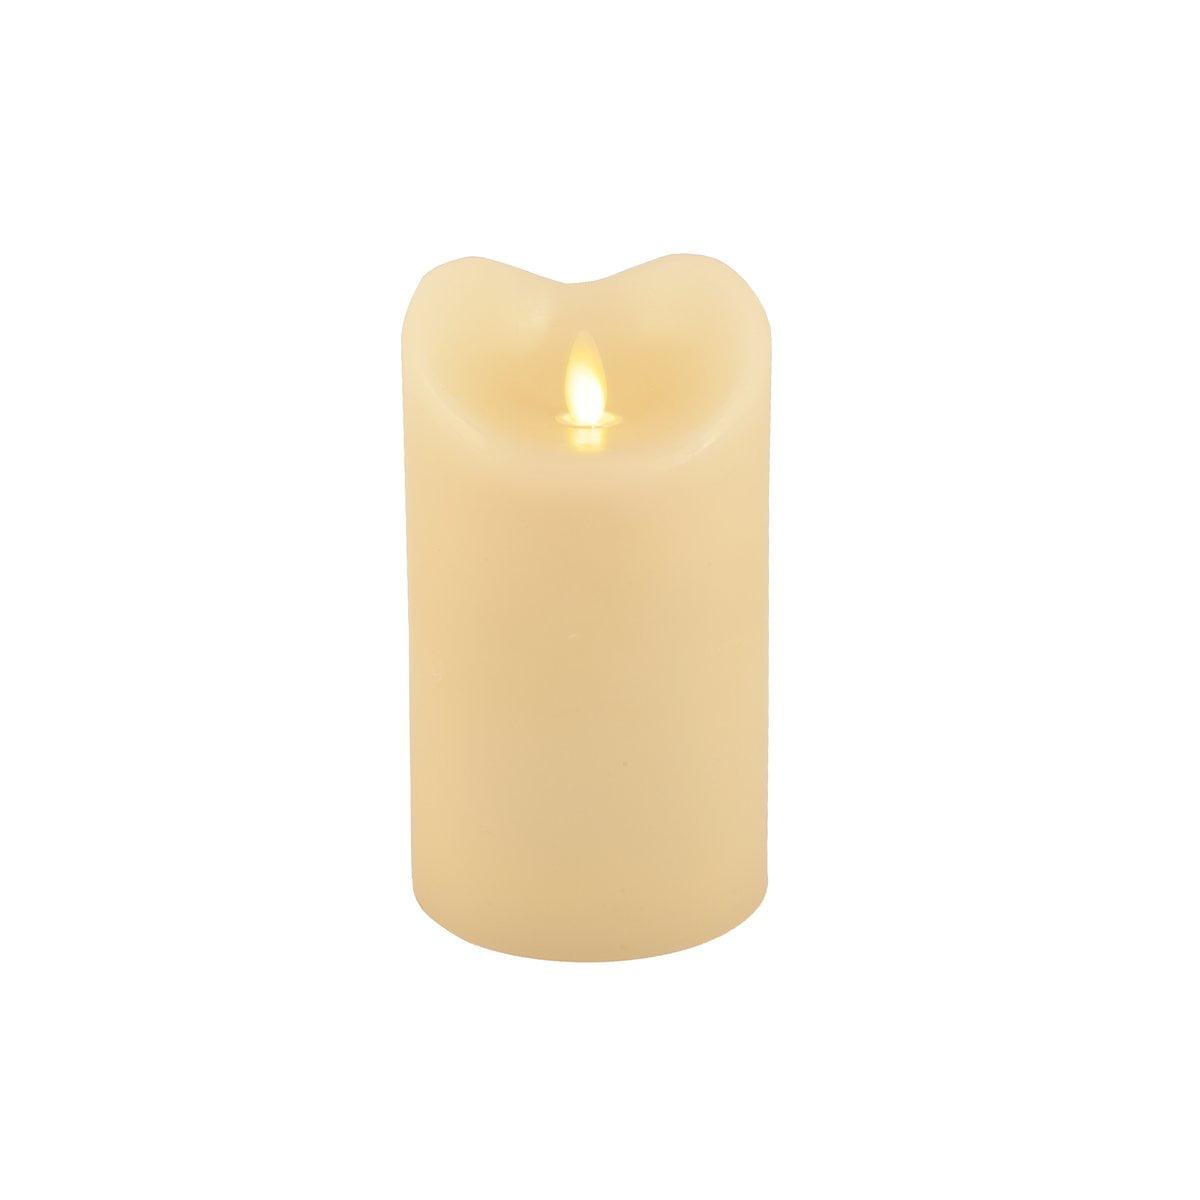 Ivory 3" x 5" Solare 3D Virtual Flame Candle